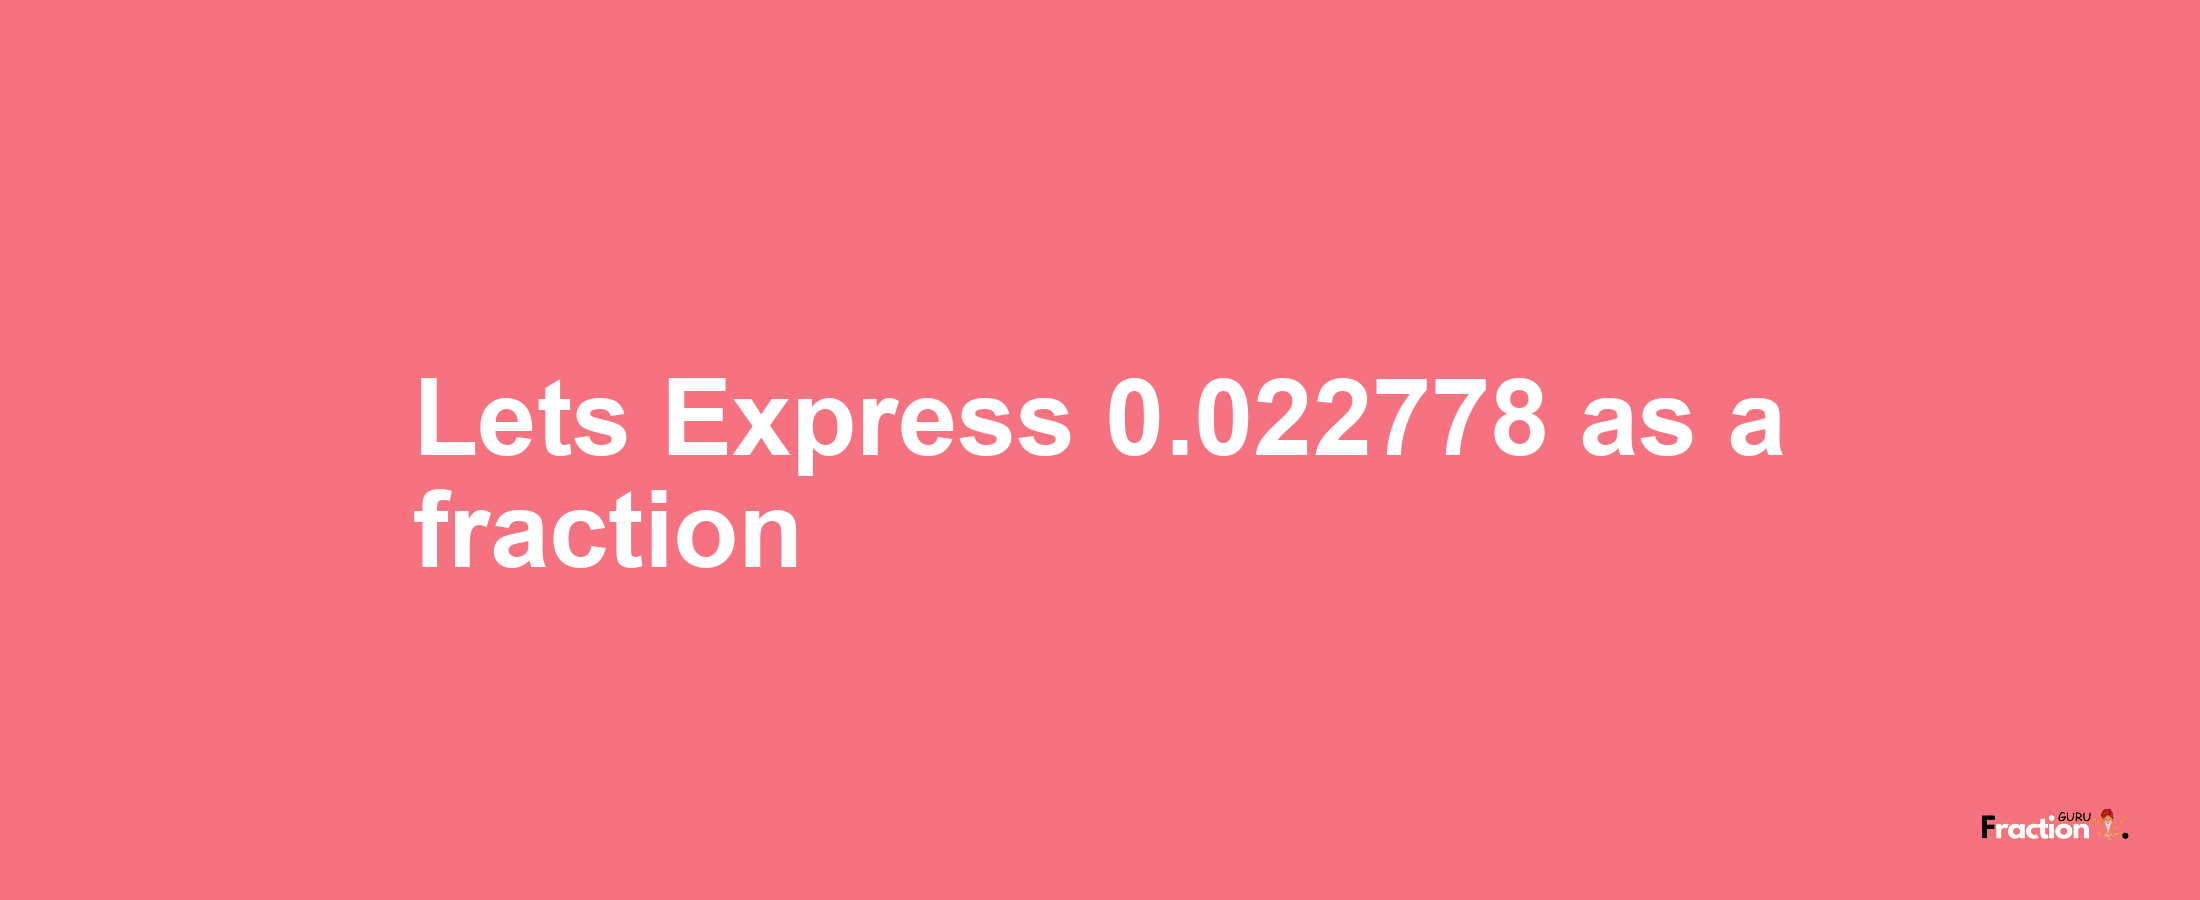 Lets Express 0.022778 as afraction